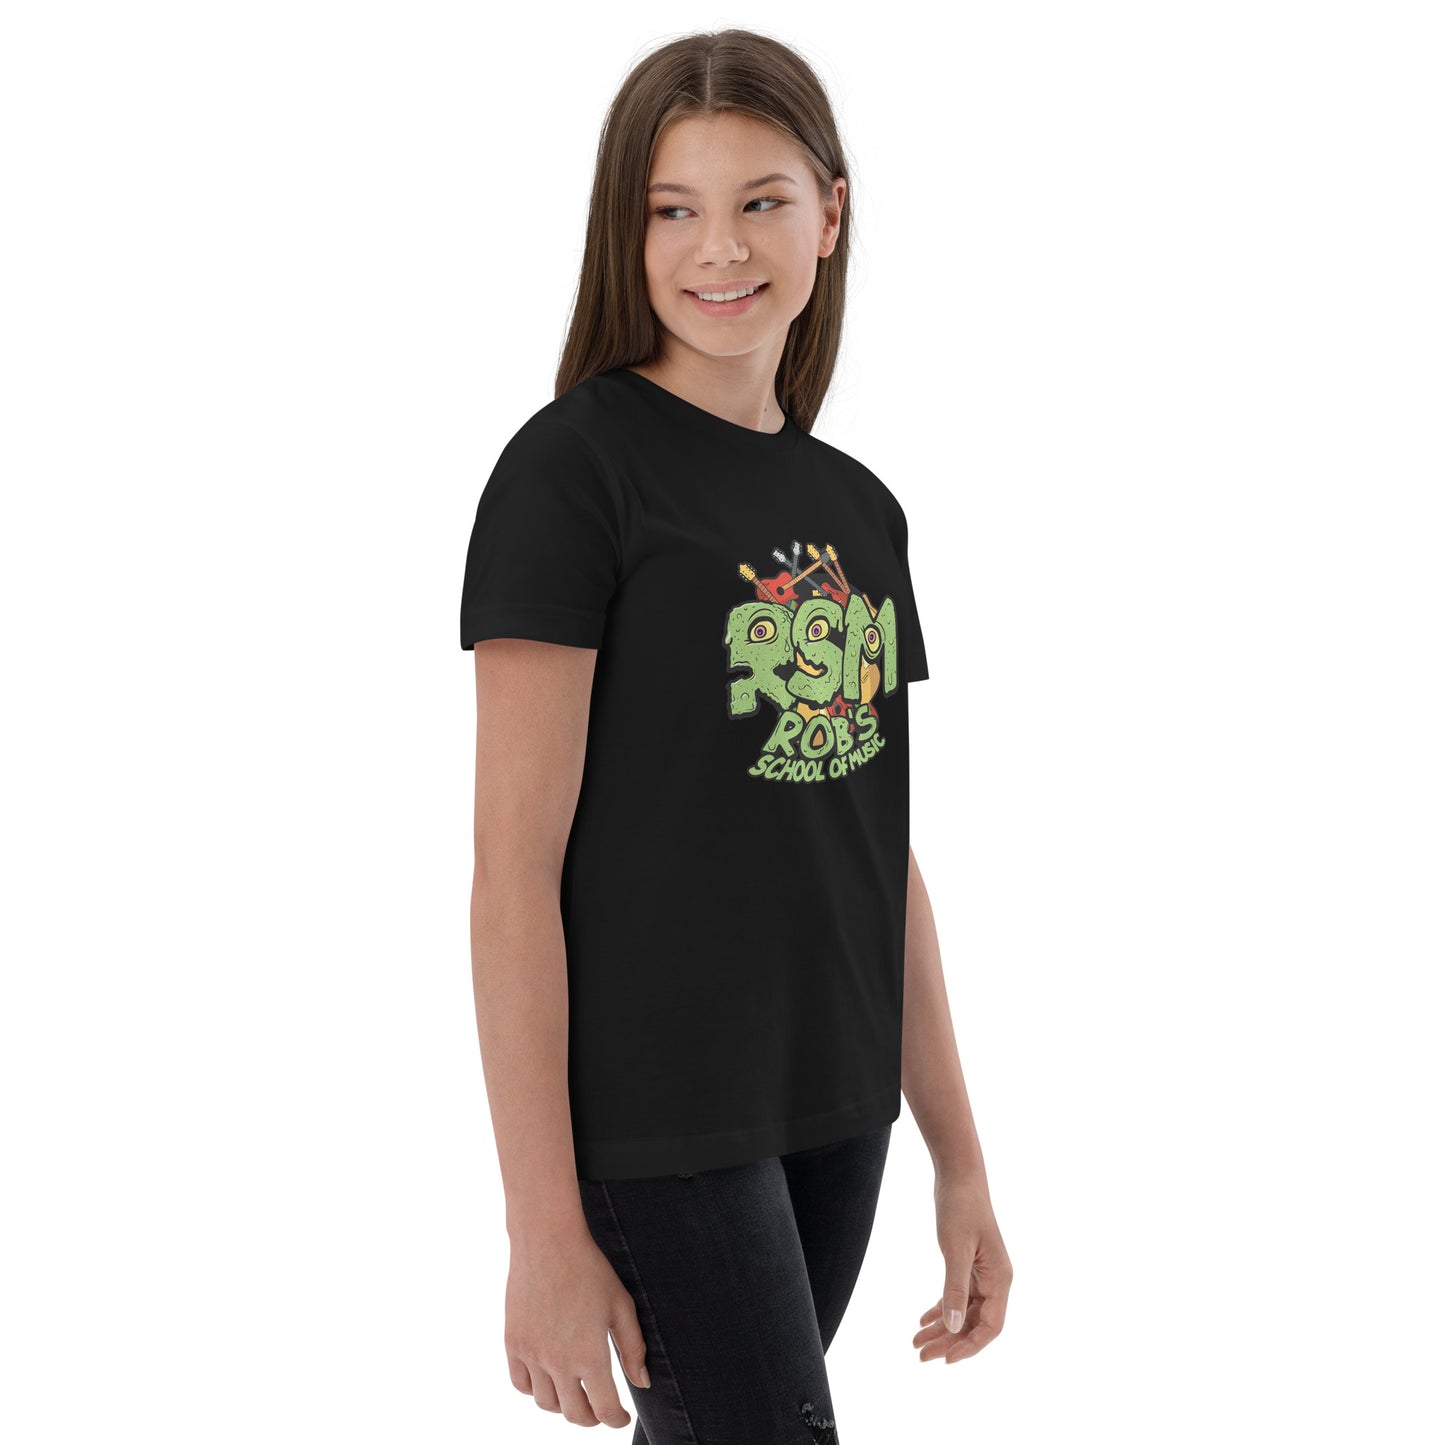 RSM Slime Youth jersey t-shirt